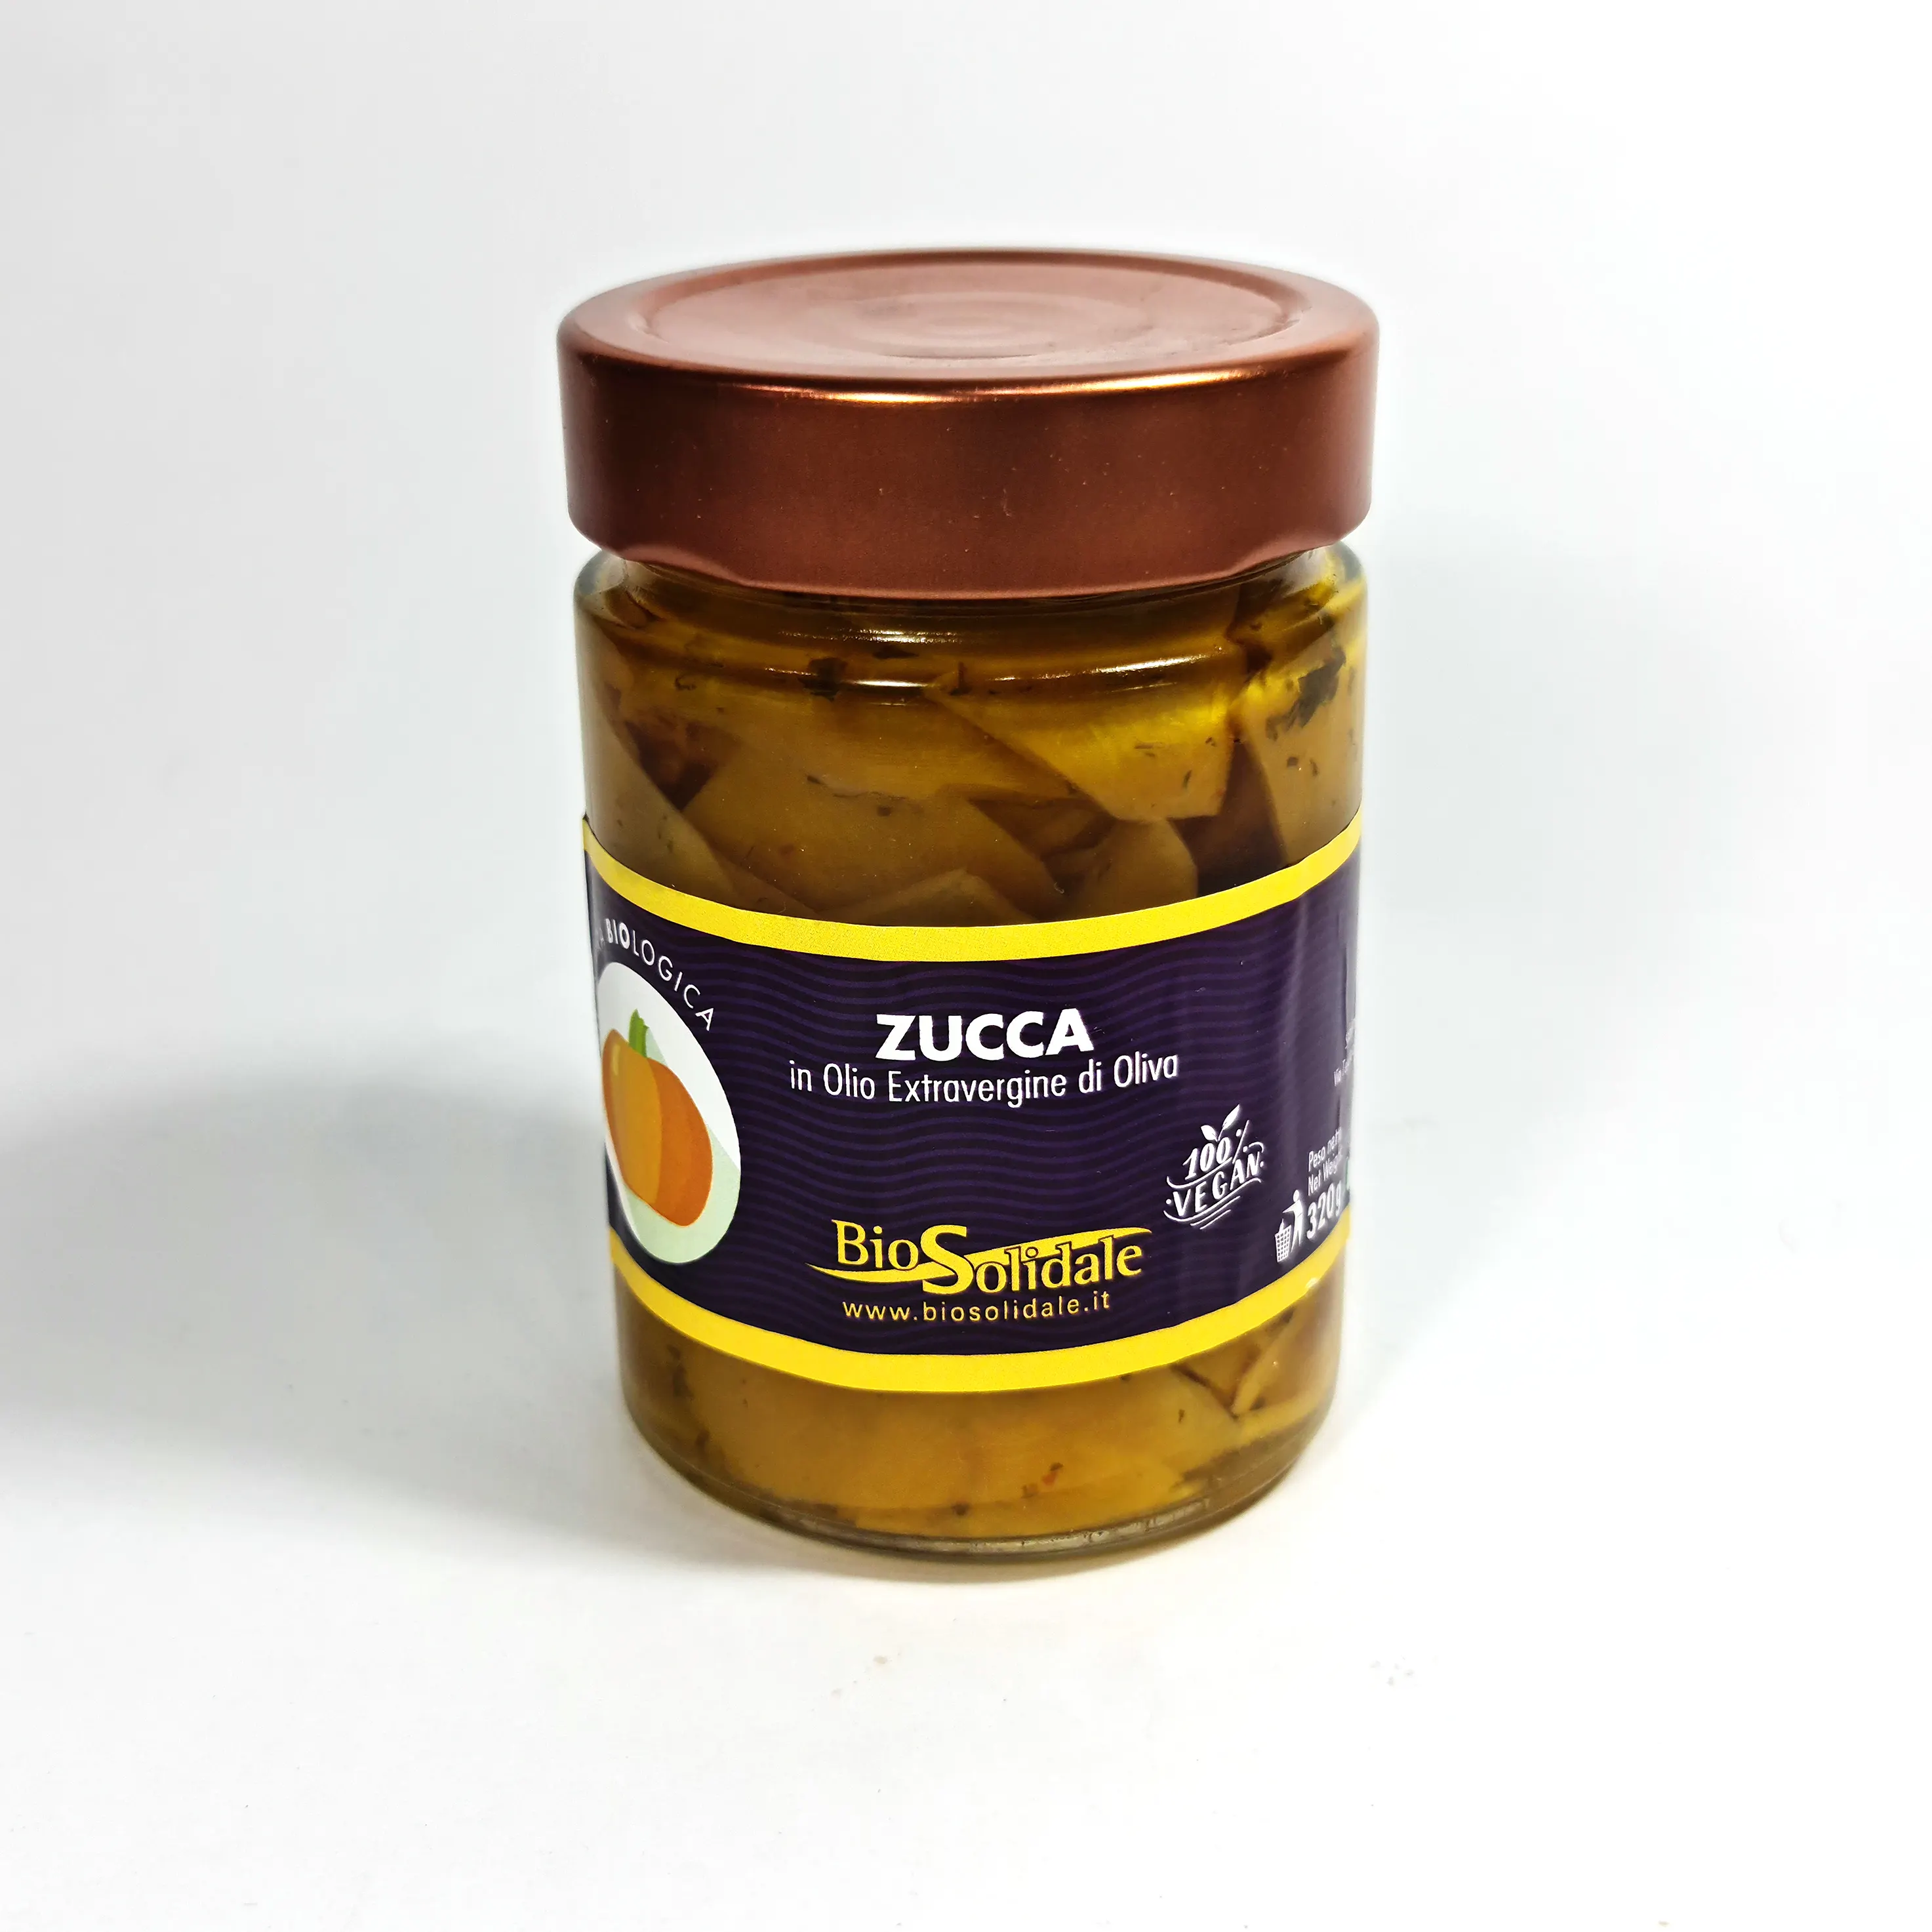 READY TO USE MADE IN ITALY ORGANIC PUMPKIN IN EXTRA VIRGIN OLIVE OIL 300 g FOR HEALTHY SANDWICH OR ITALIAN RECIPES